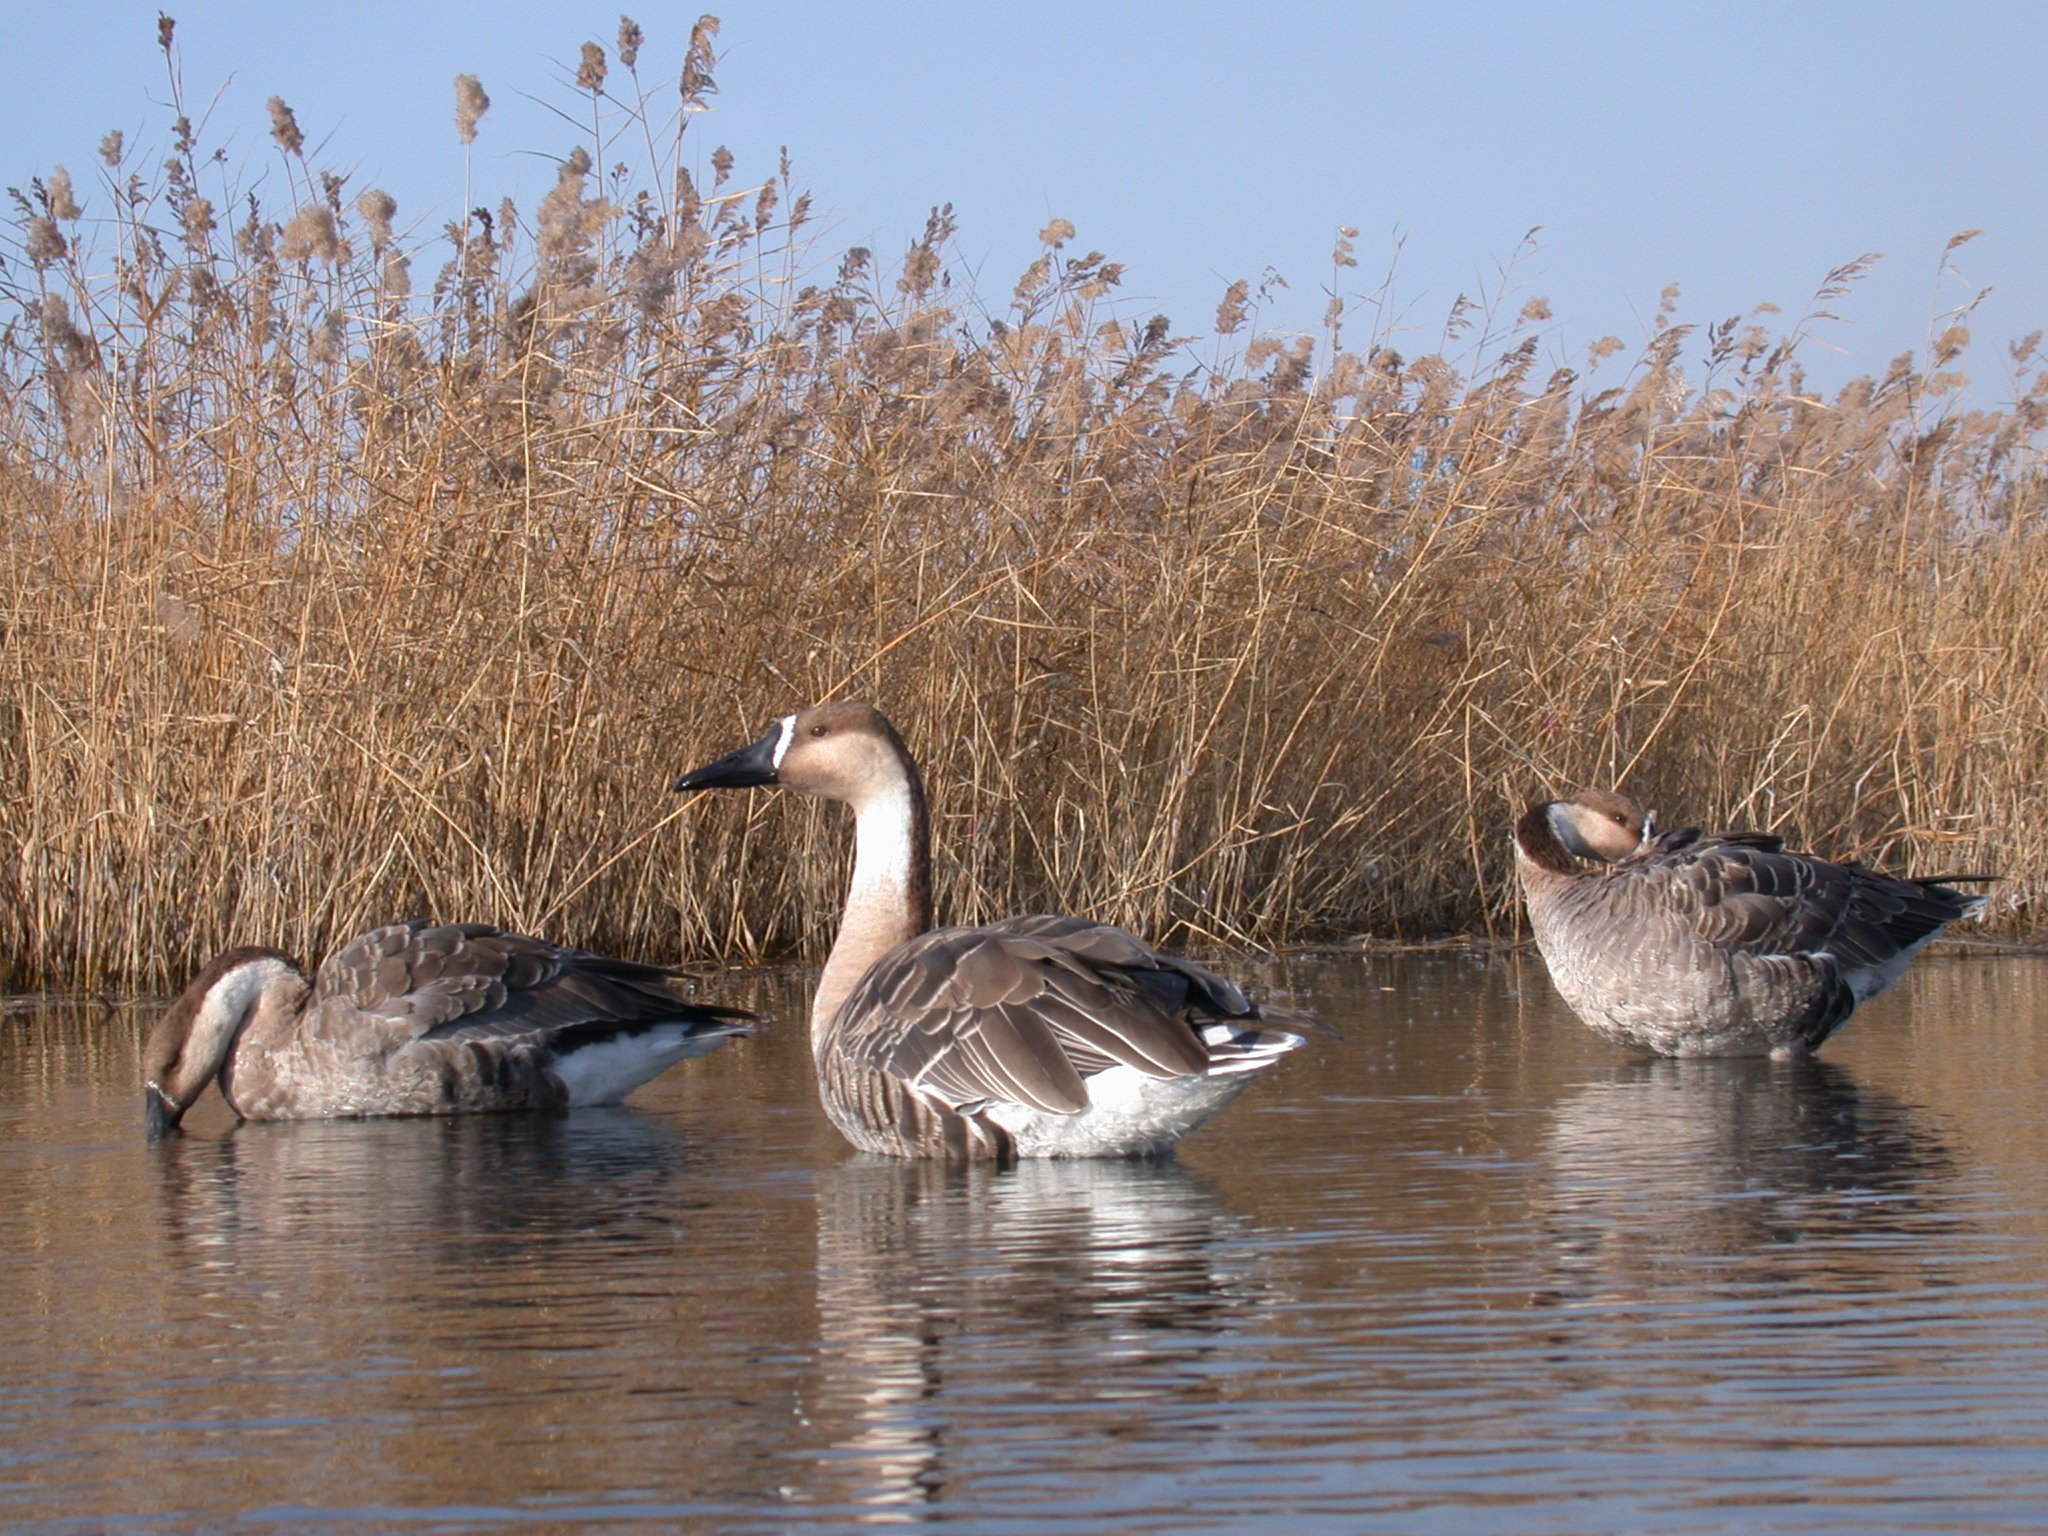 Rare migratory swan geese forage in their breeding habitats on the lower Ulz River. 